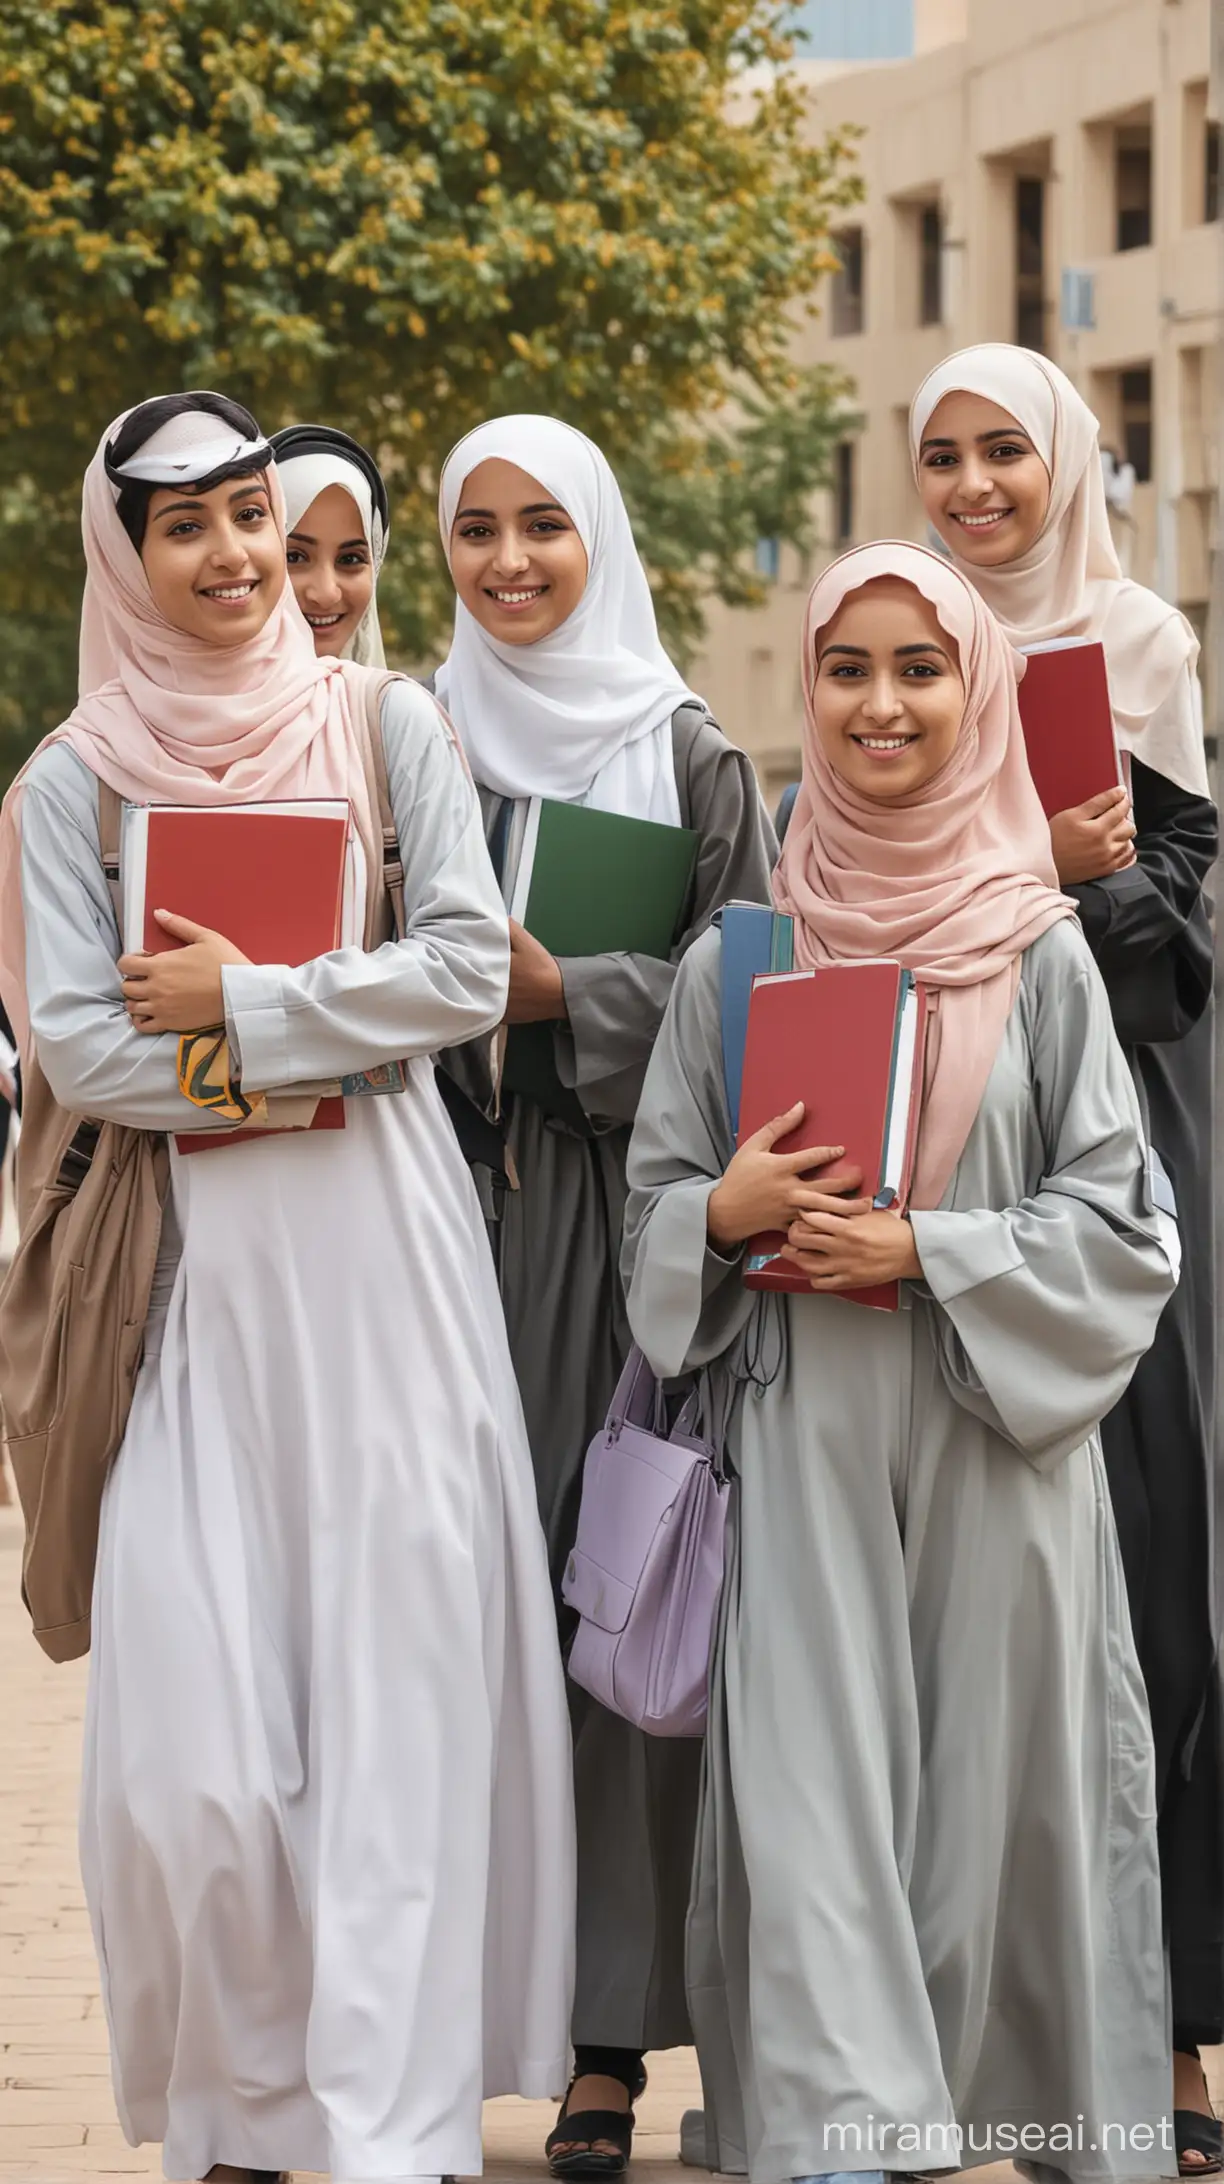 Muslim Students Carrying Books Together in Academic Pursuit